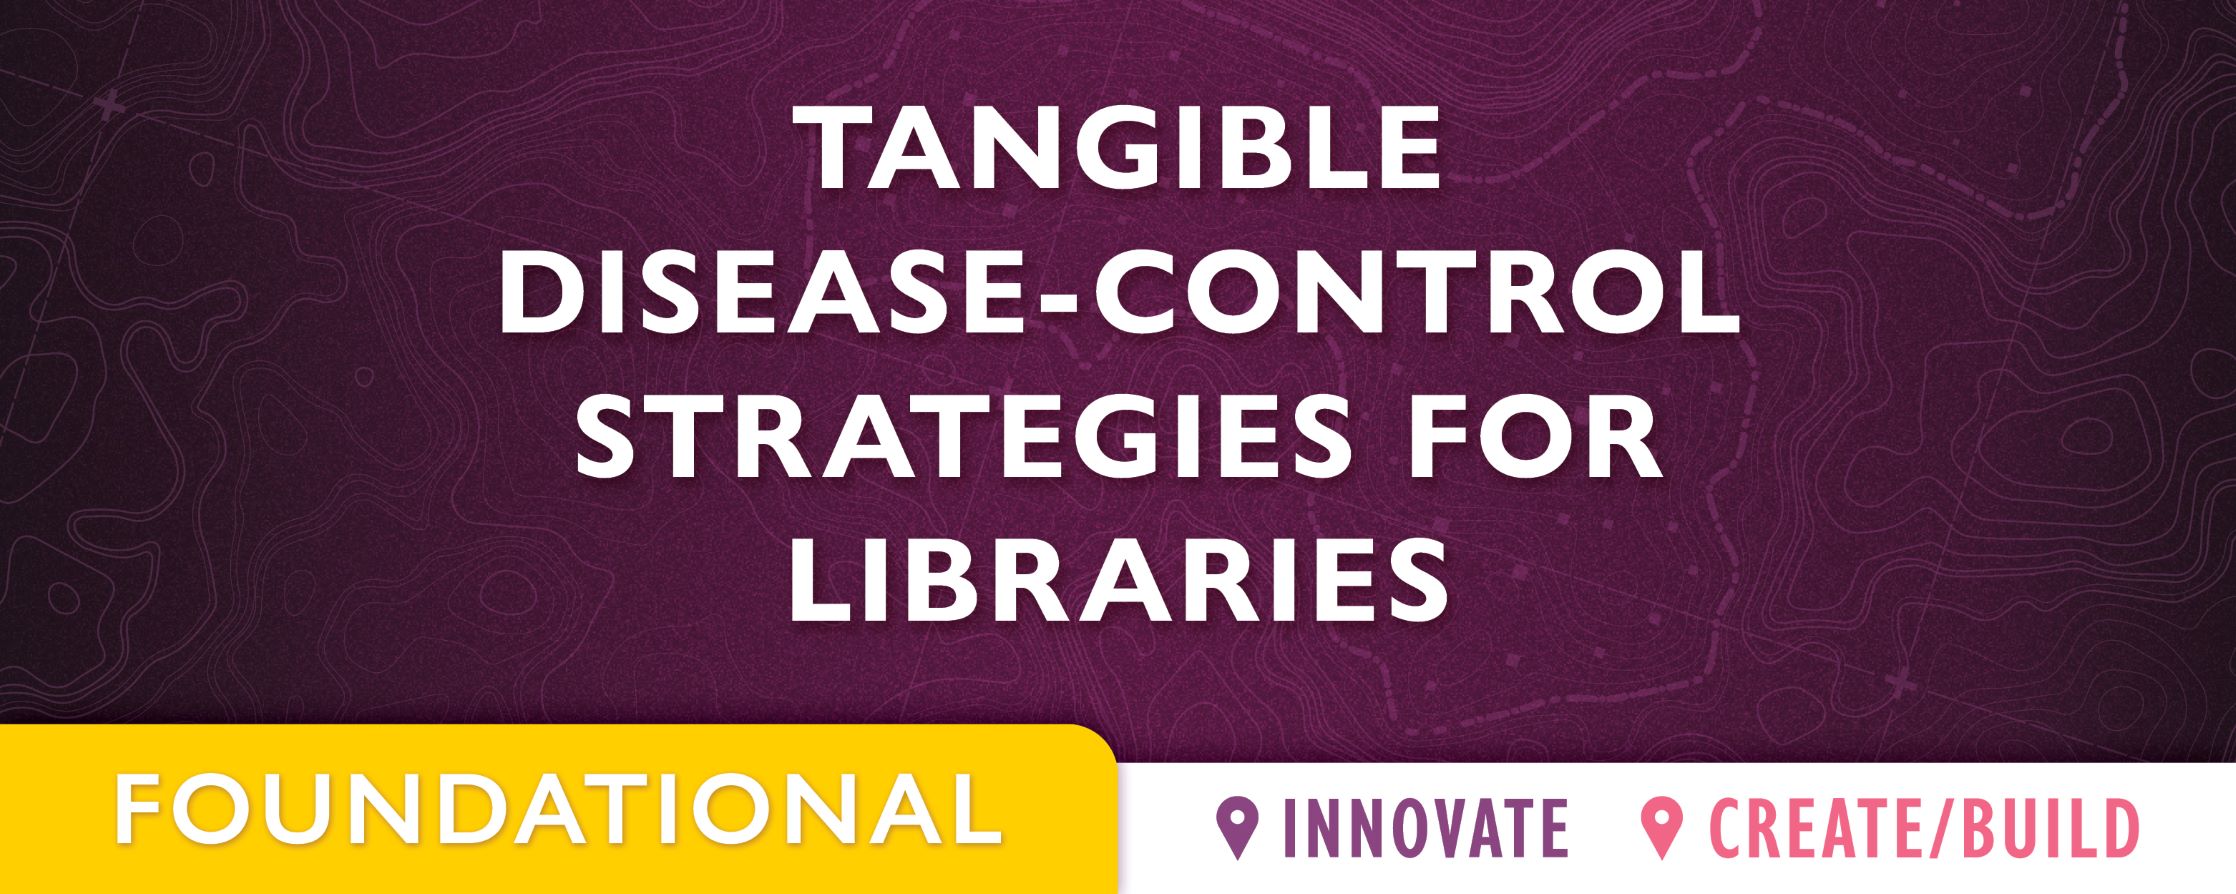 purple background with text: Tangible Disease-Control Strategies for Libraries 